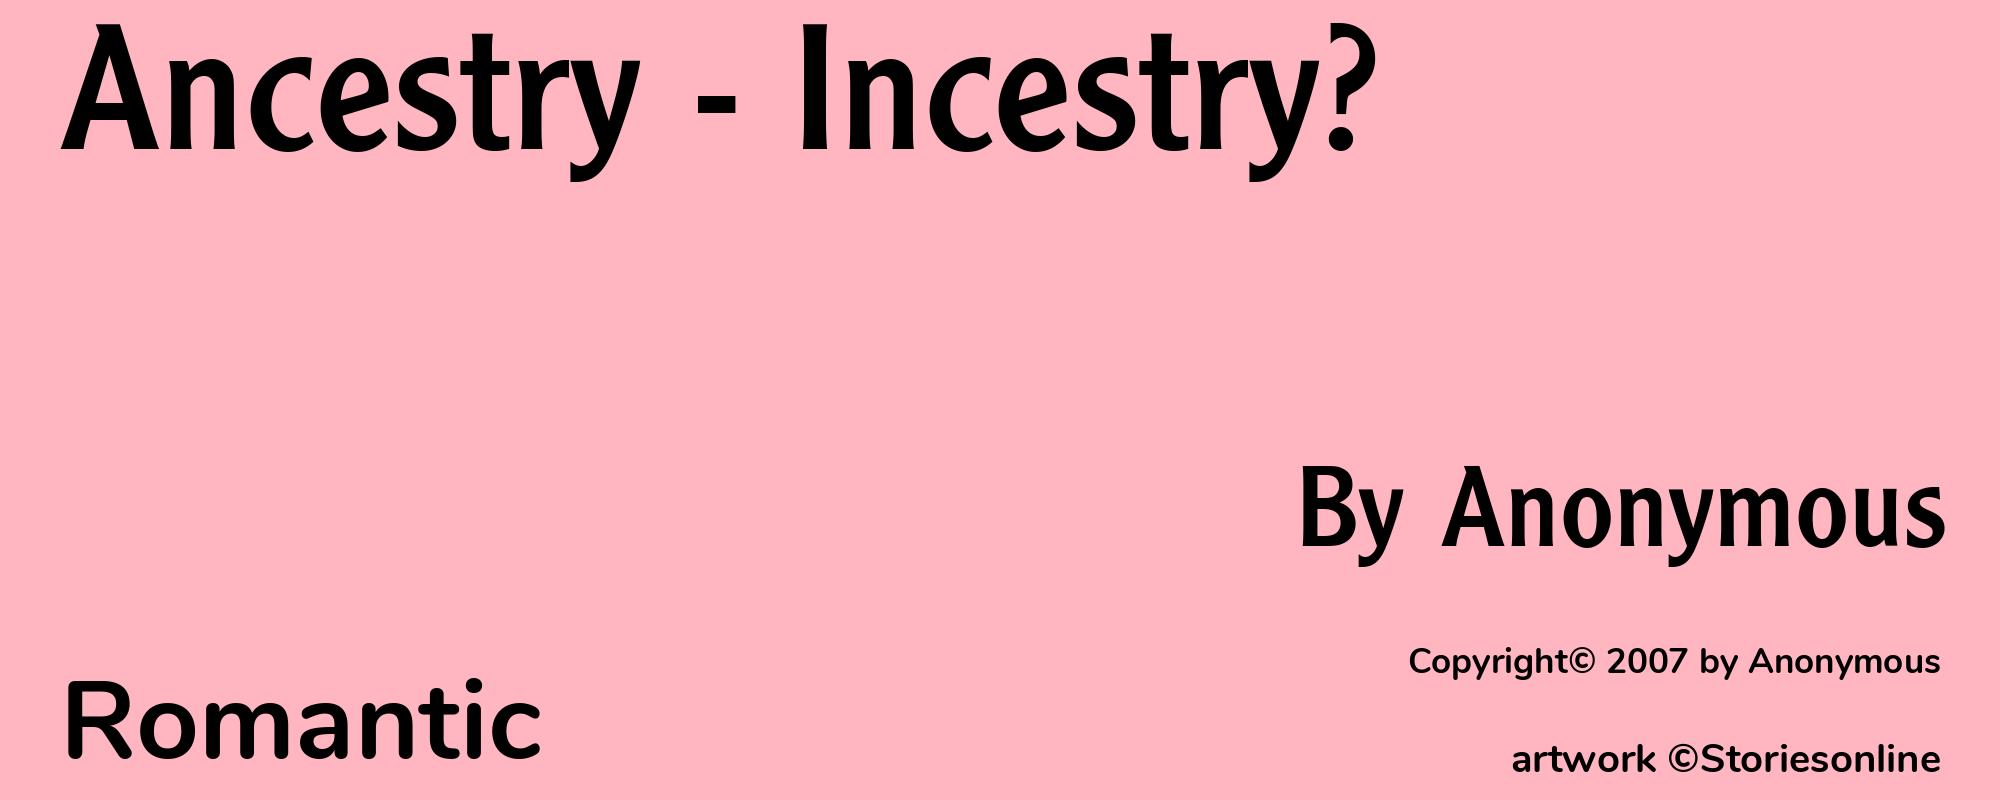 Ancestry - Incestry? - Cover